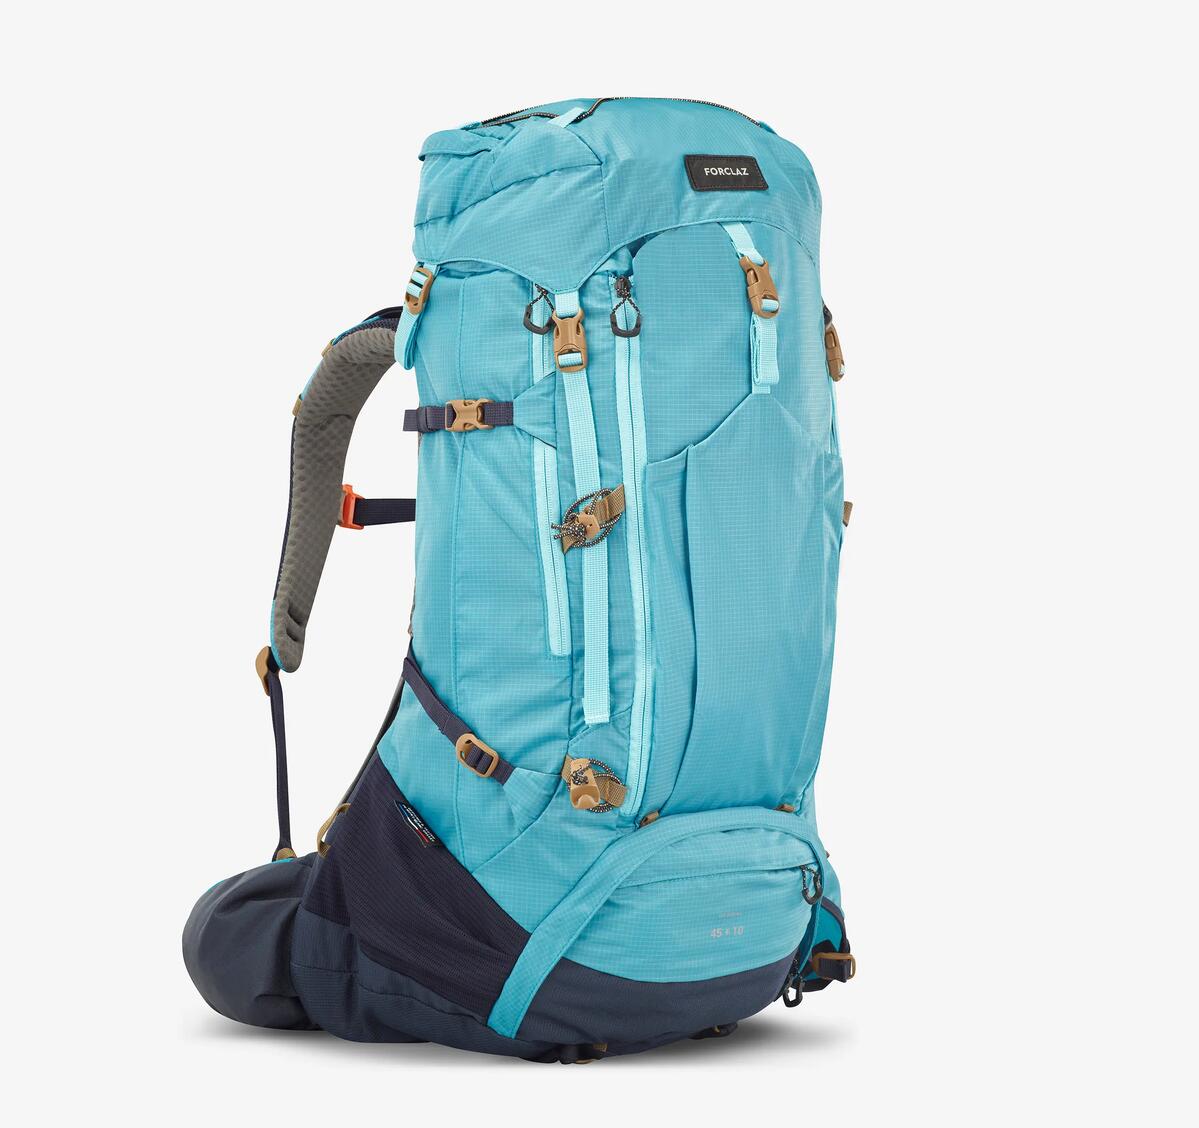 How to choose the best hiking backpack?